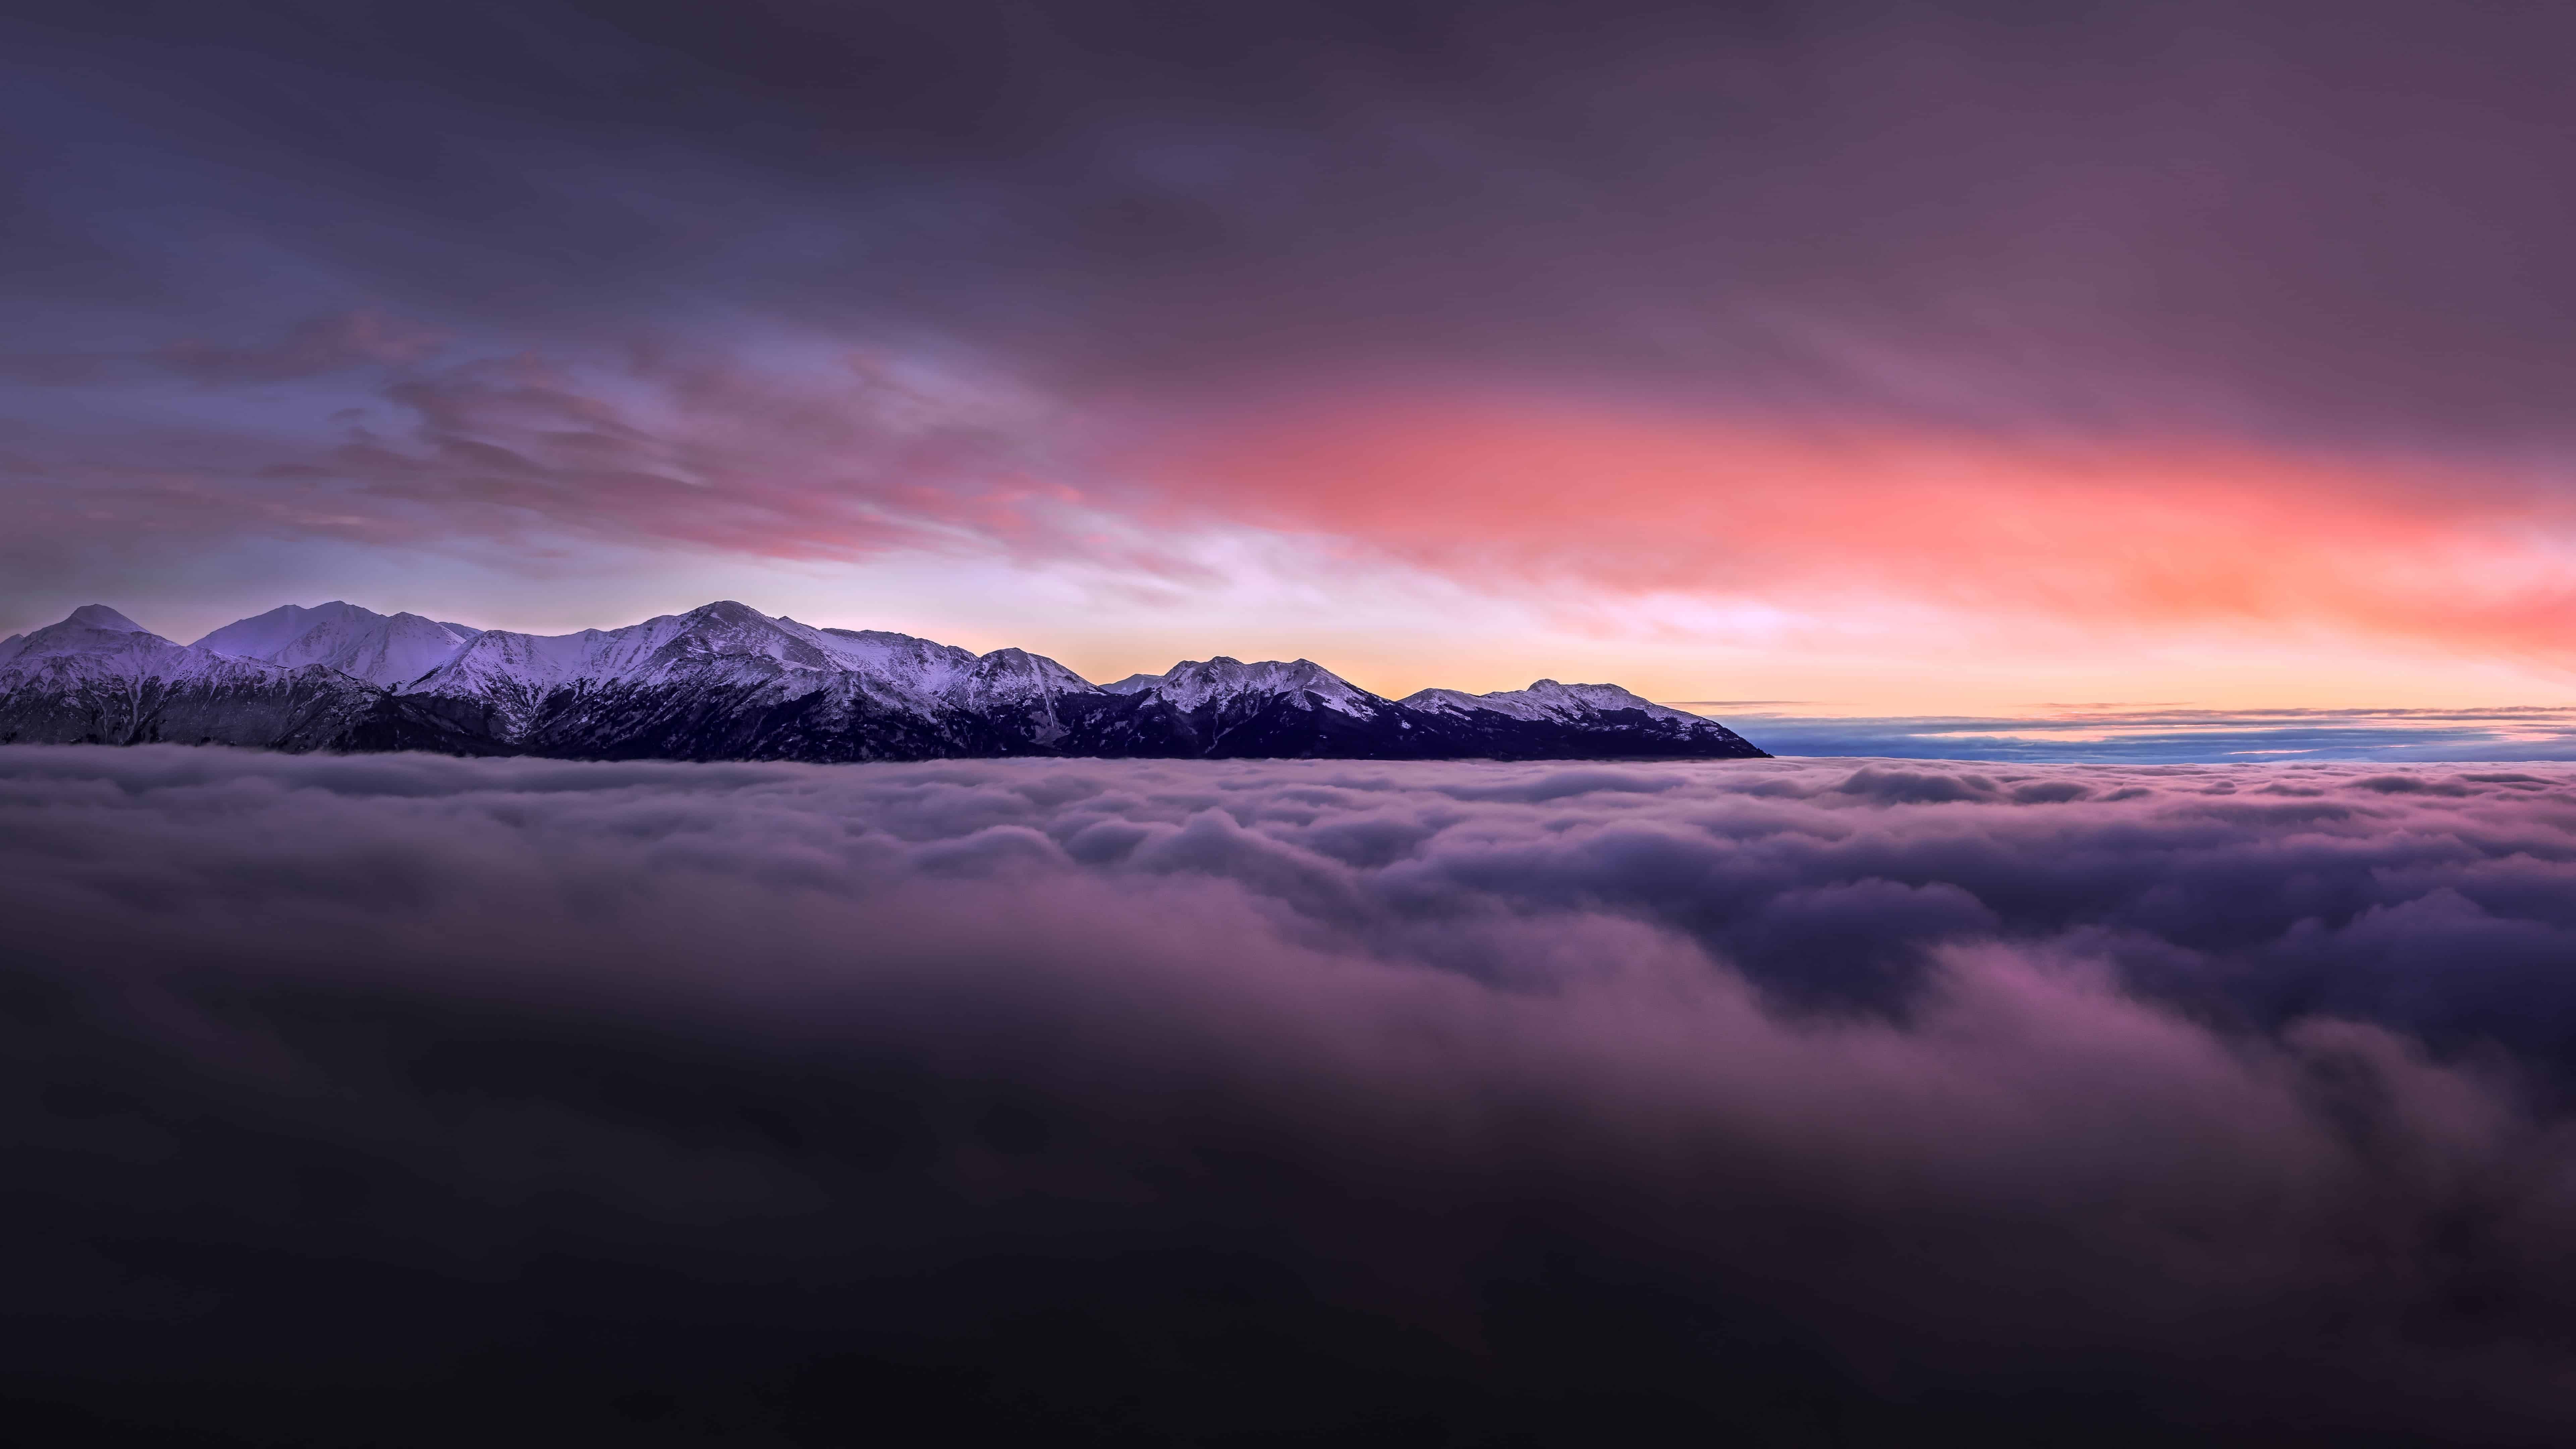 Sunset With Mountains Above Clouds. Wallpaper pc, Cool wallpaper, Cool wallpaper for pc